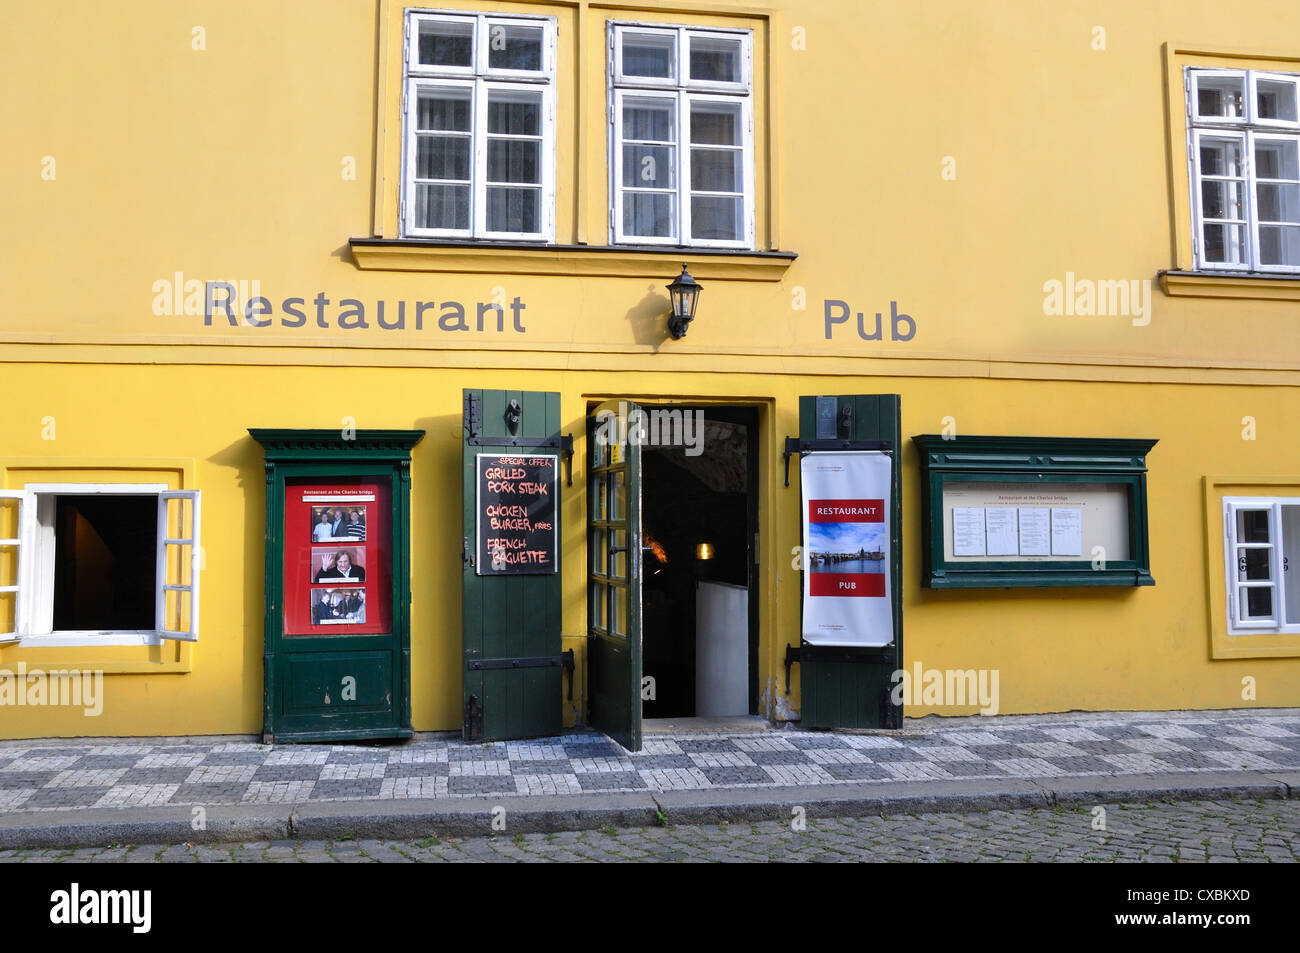 Restaurant and Pub frontage in Prague, Czech Republic Stock Photo